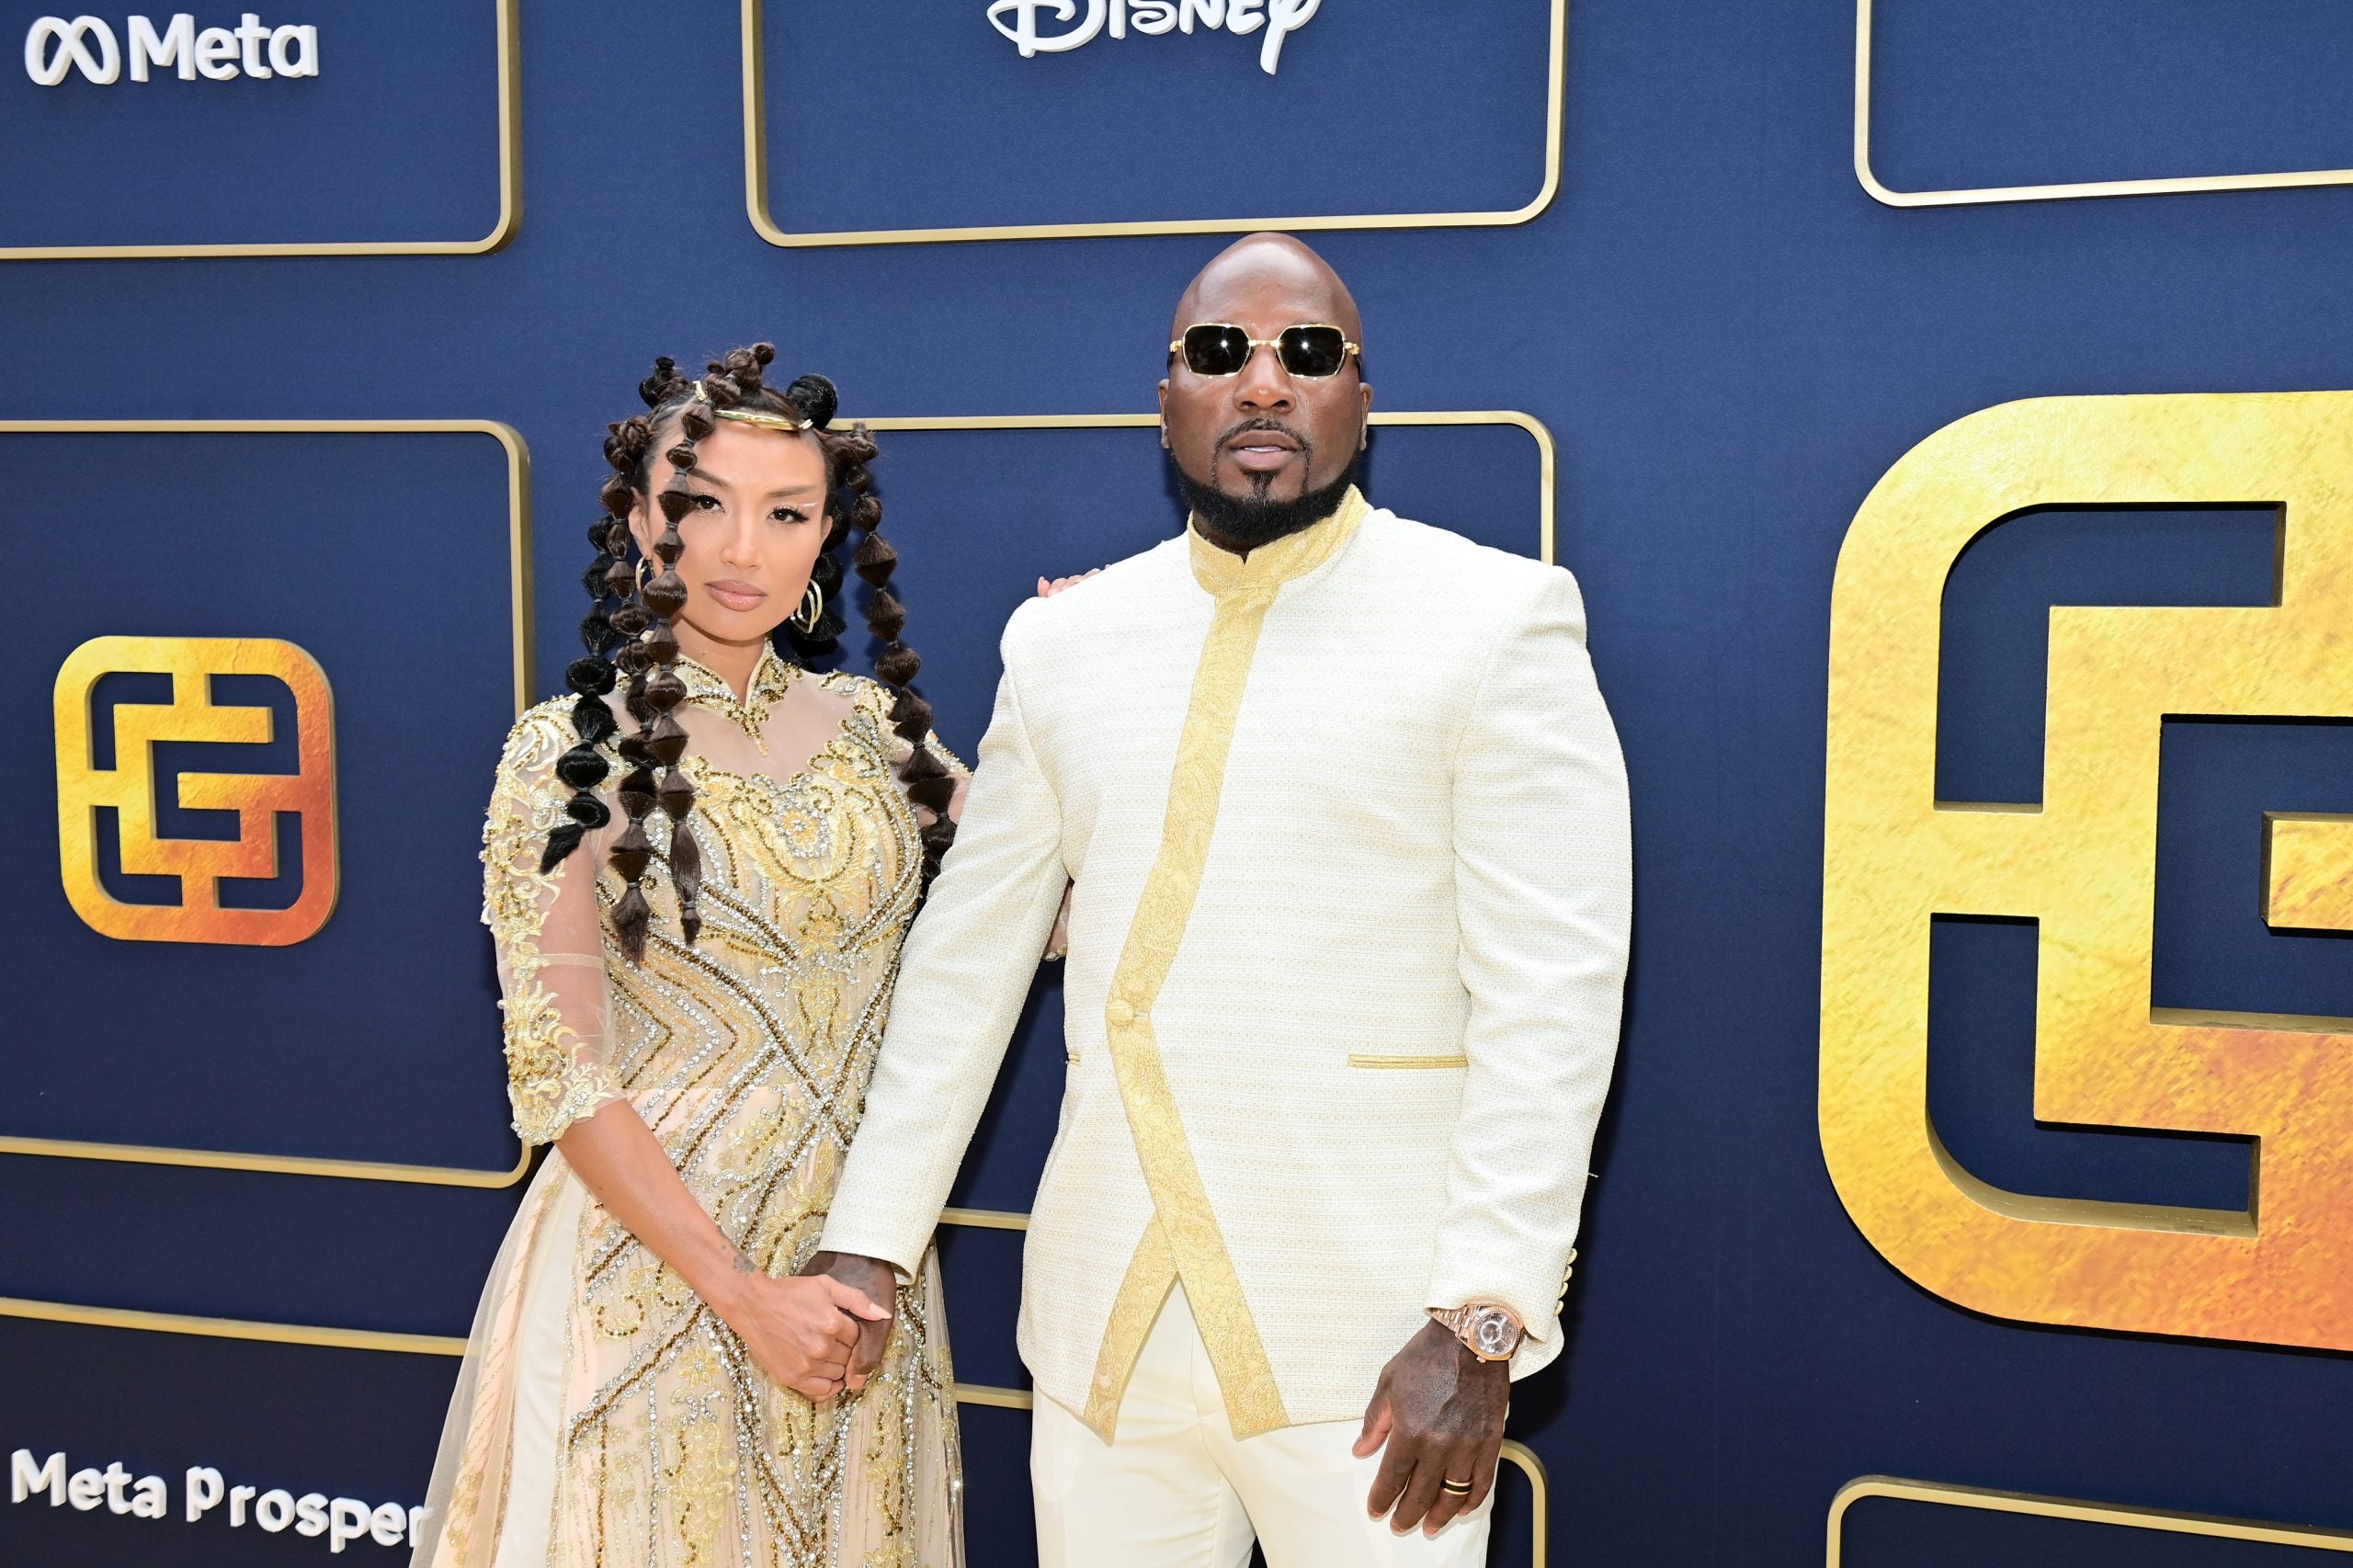 Jeezy And Jeannie Mai Split After Two Years Of Marriage: Their Relationship Timeline